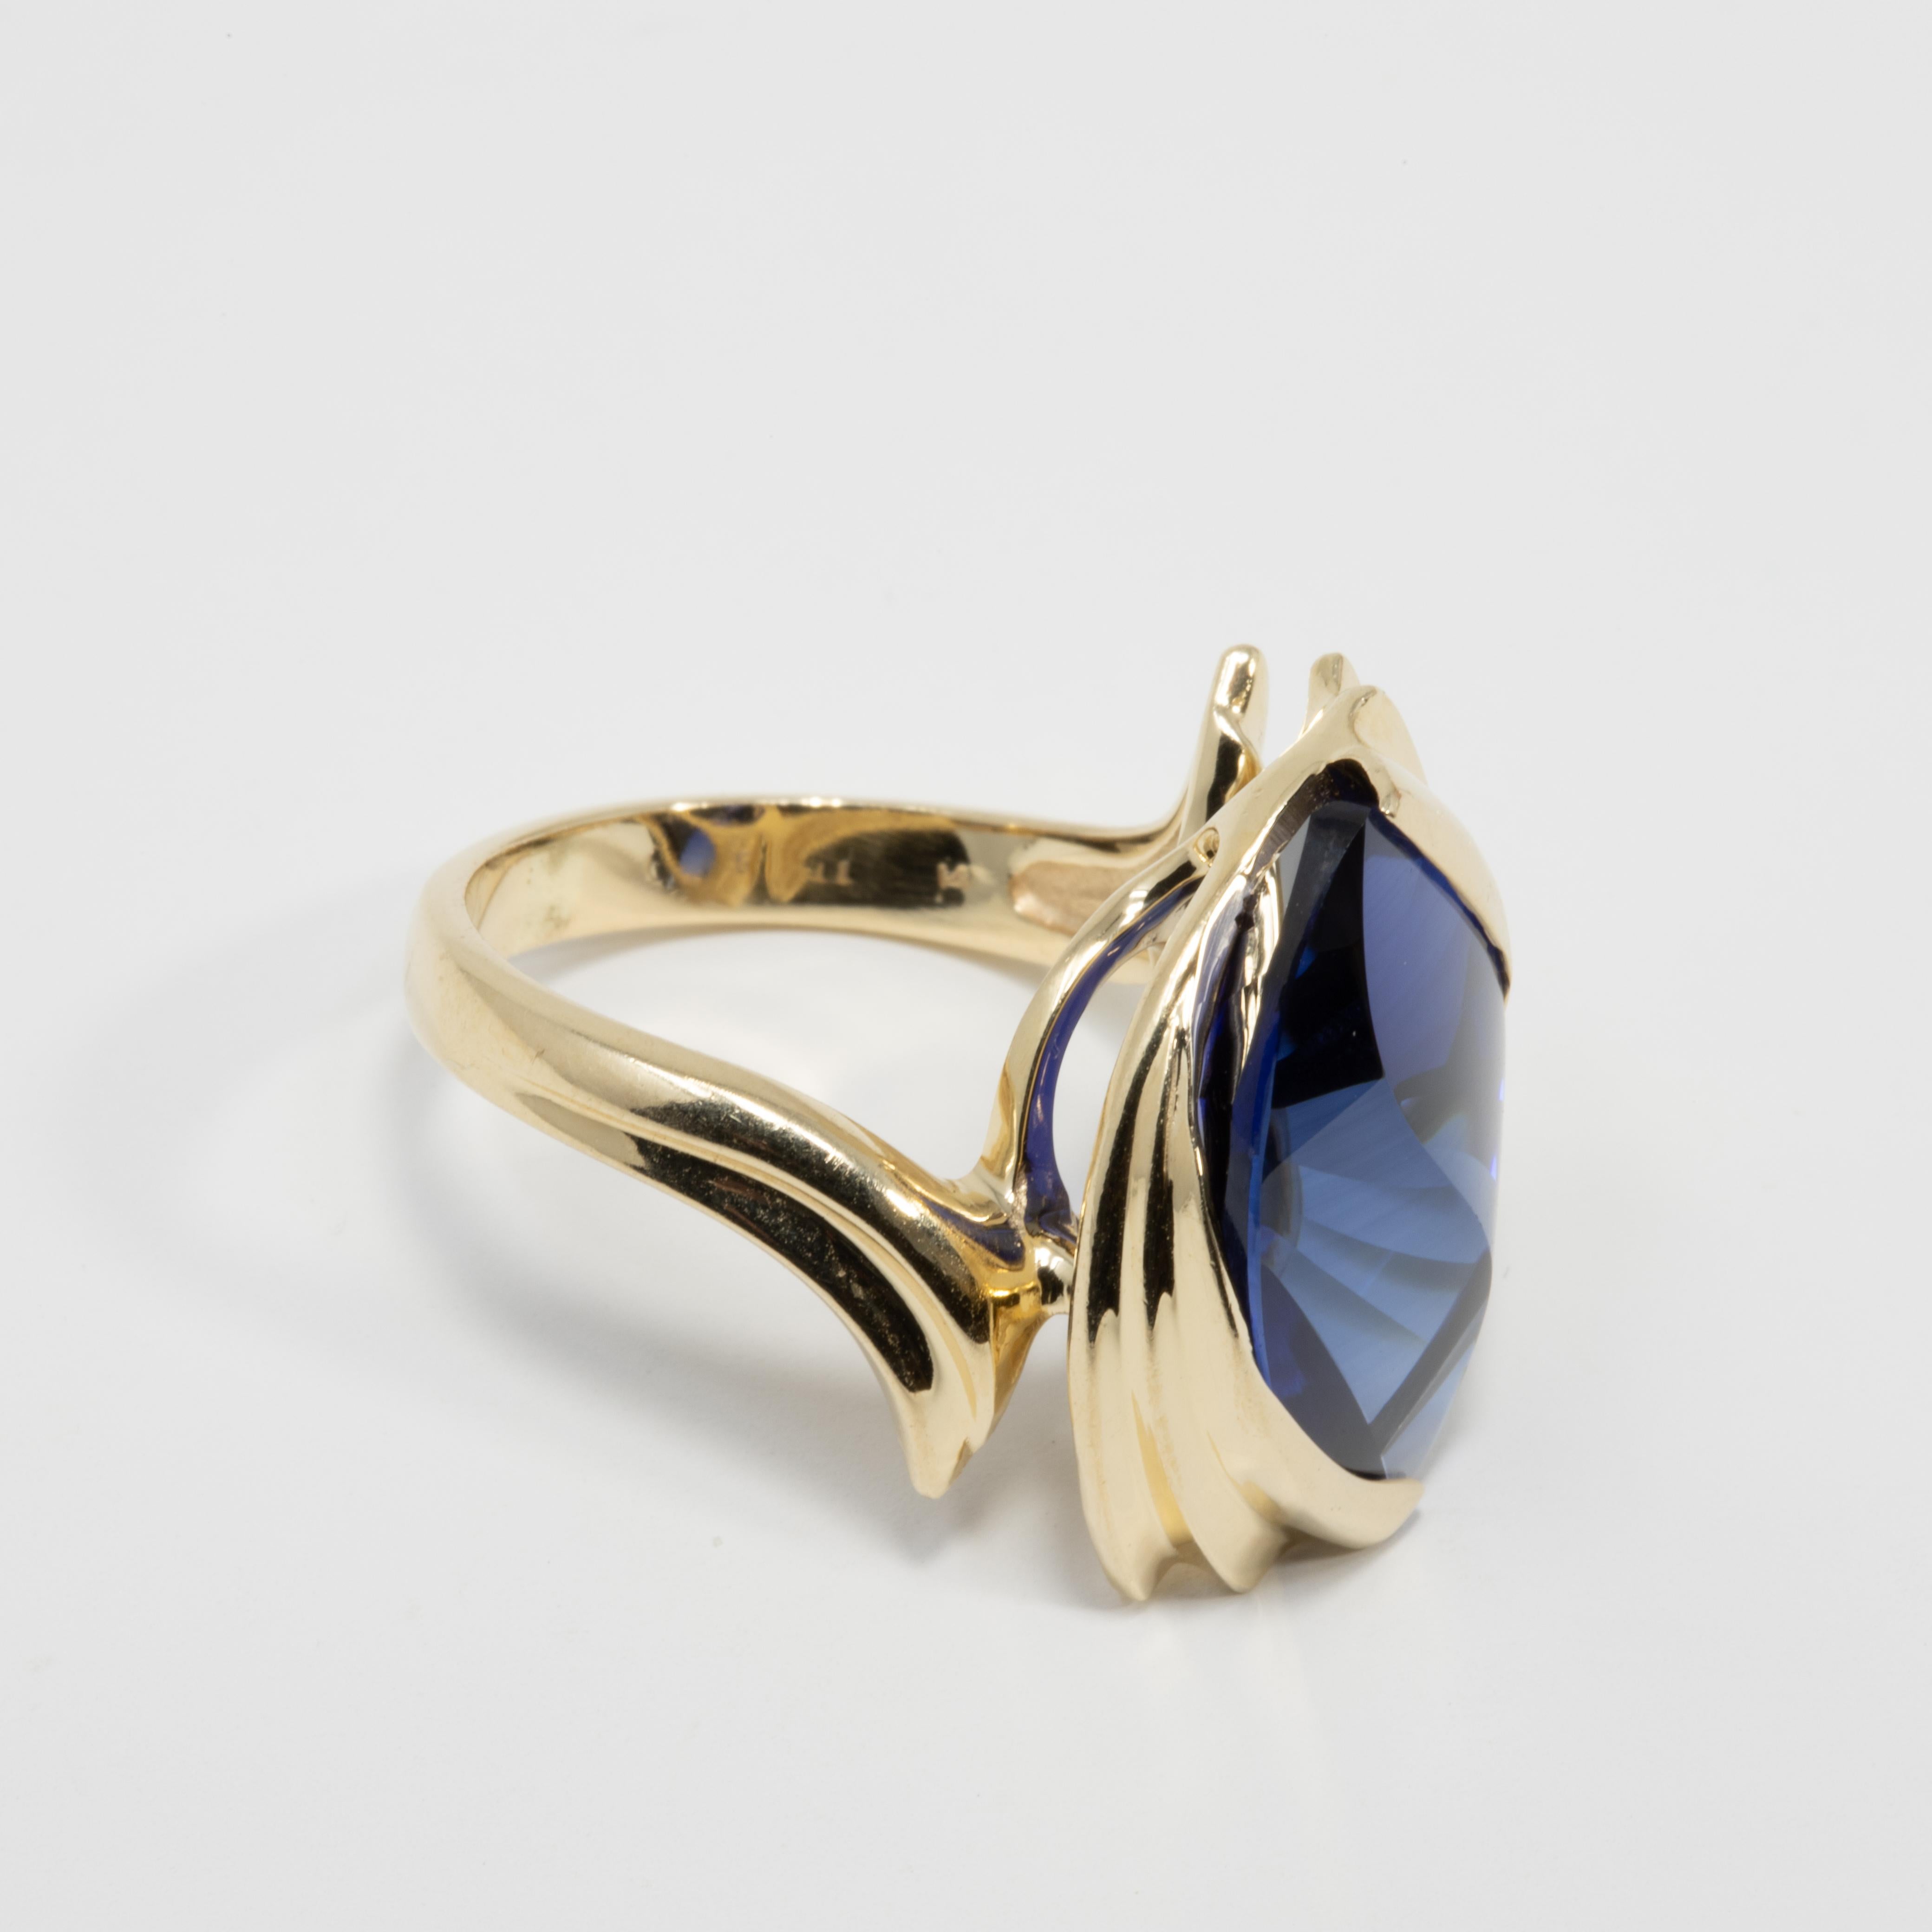 Custom Cut Created Sapphire Cocktail Ring in 14 Karat Gold In Excellent Condition For Sale In Milford, DE